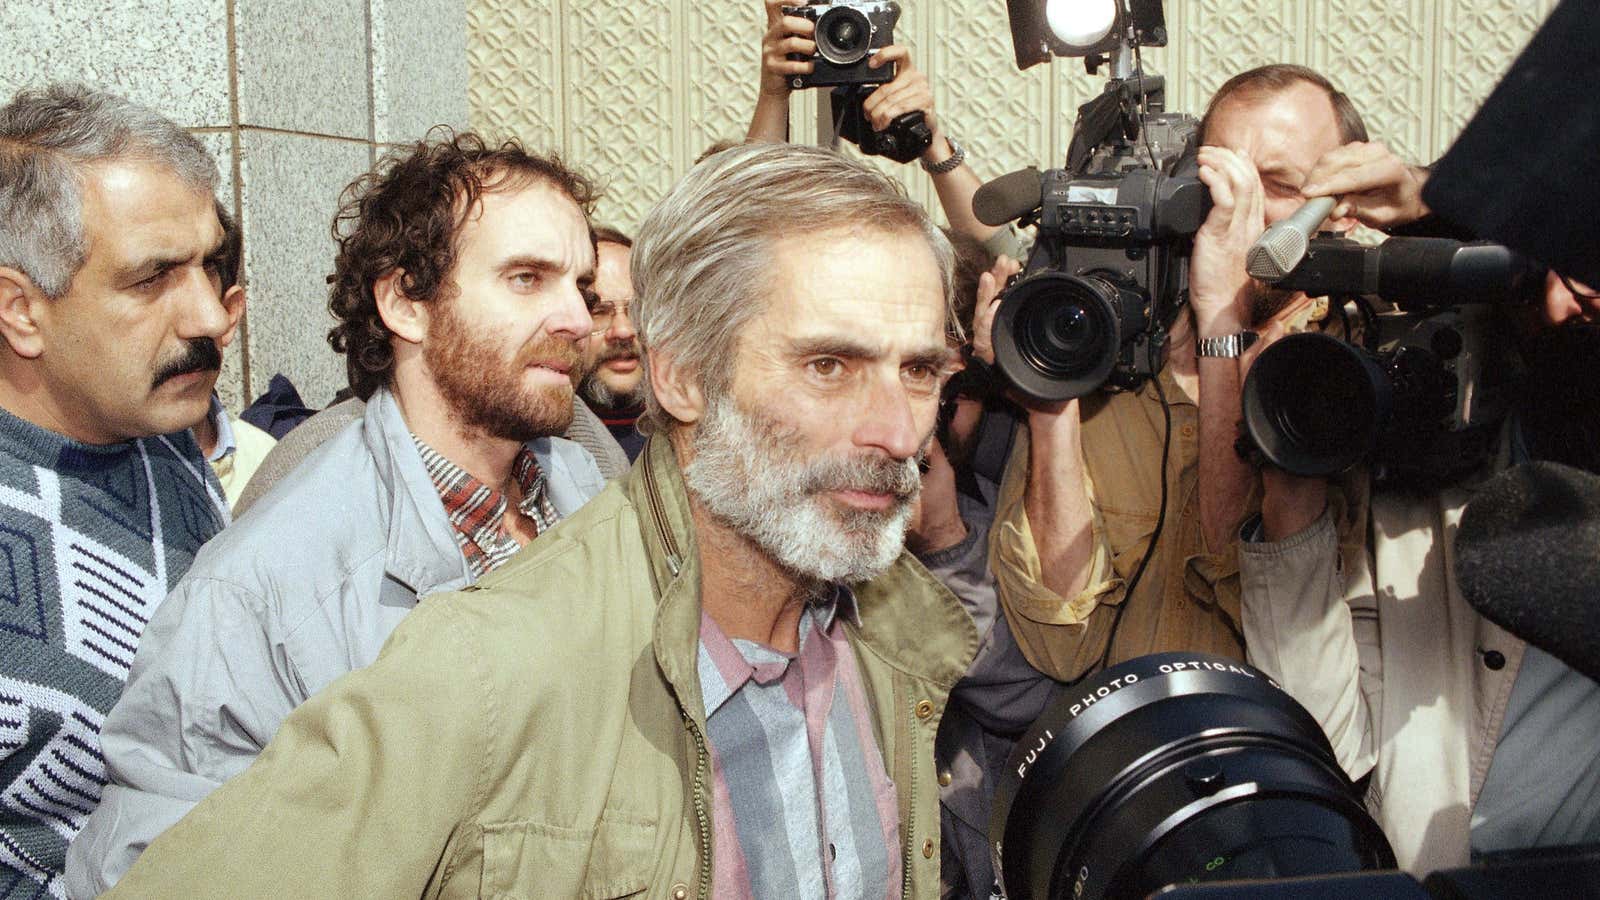 Bob Simon (center) and his colleagues in 1991, after being freed from an Iraqi jail where they had spent 40 days.